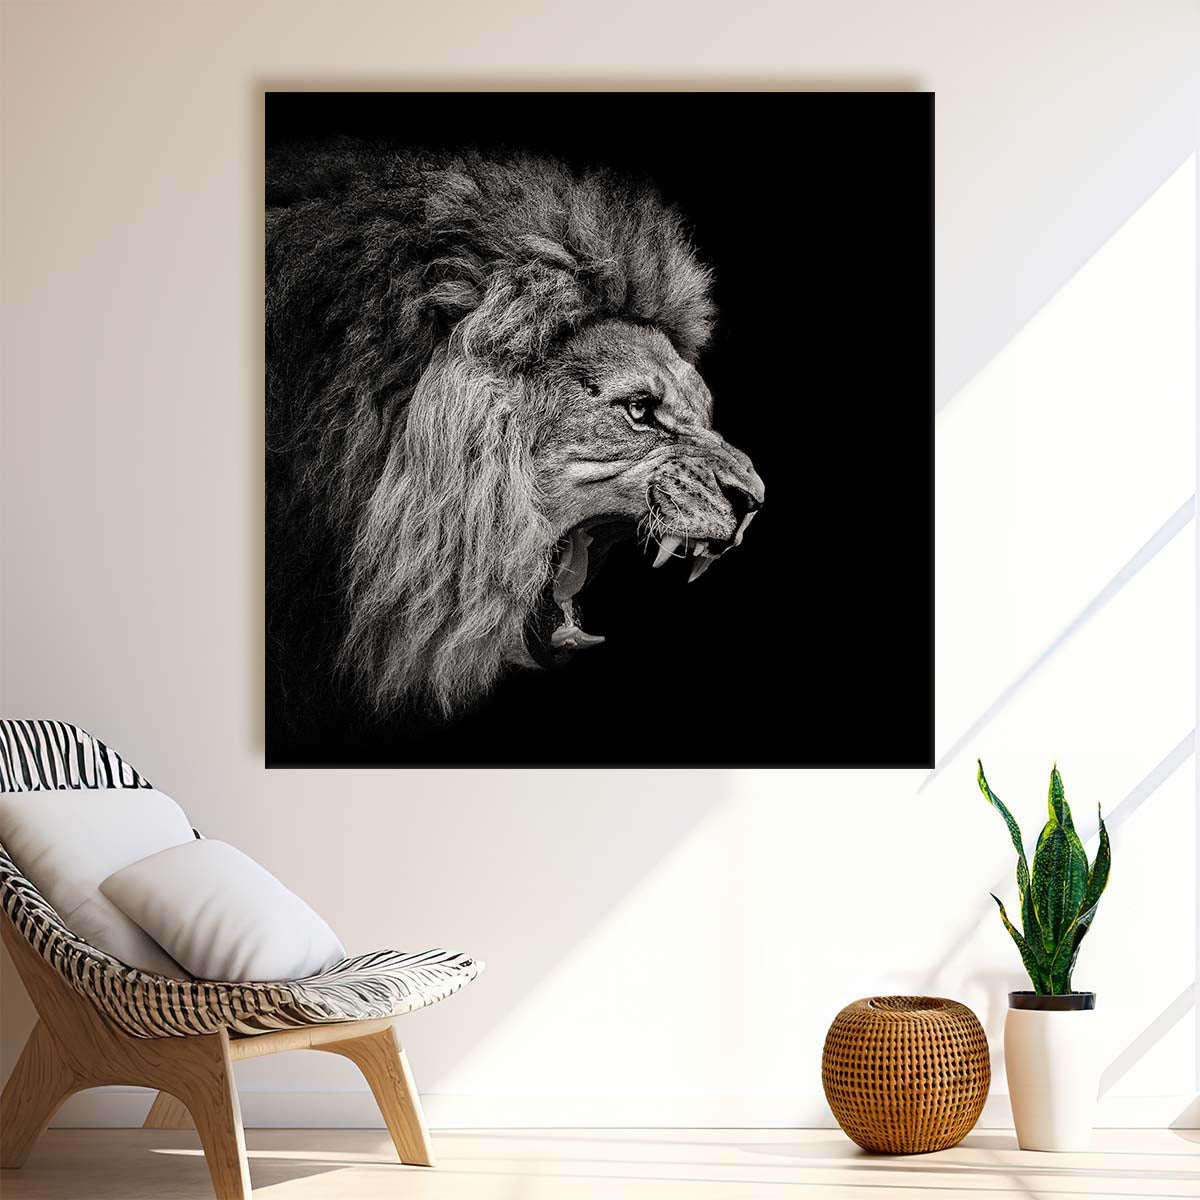 Dark Monochrome Roaring Lion The Angry Predator Wall Art by Luxuriance Designs. Made in USA.